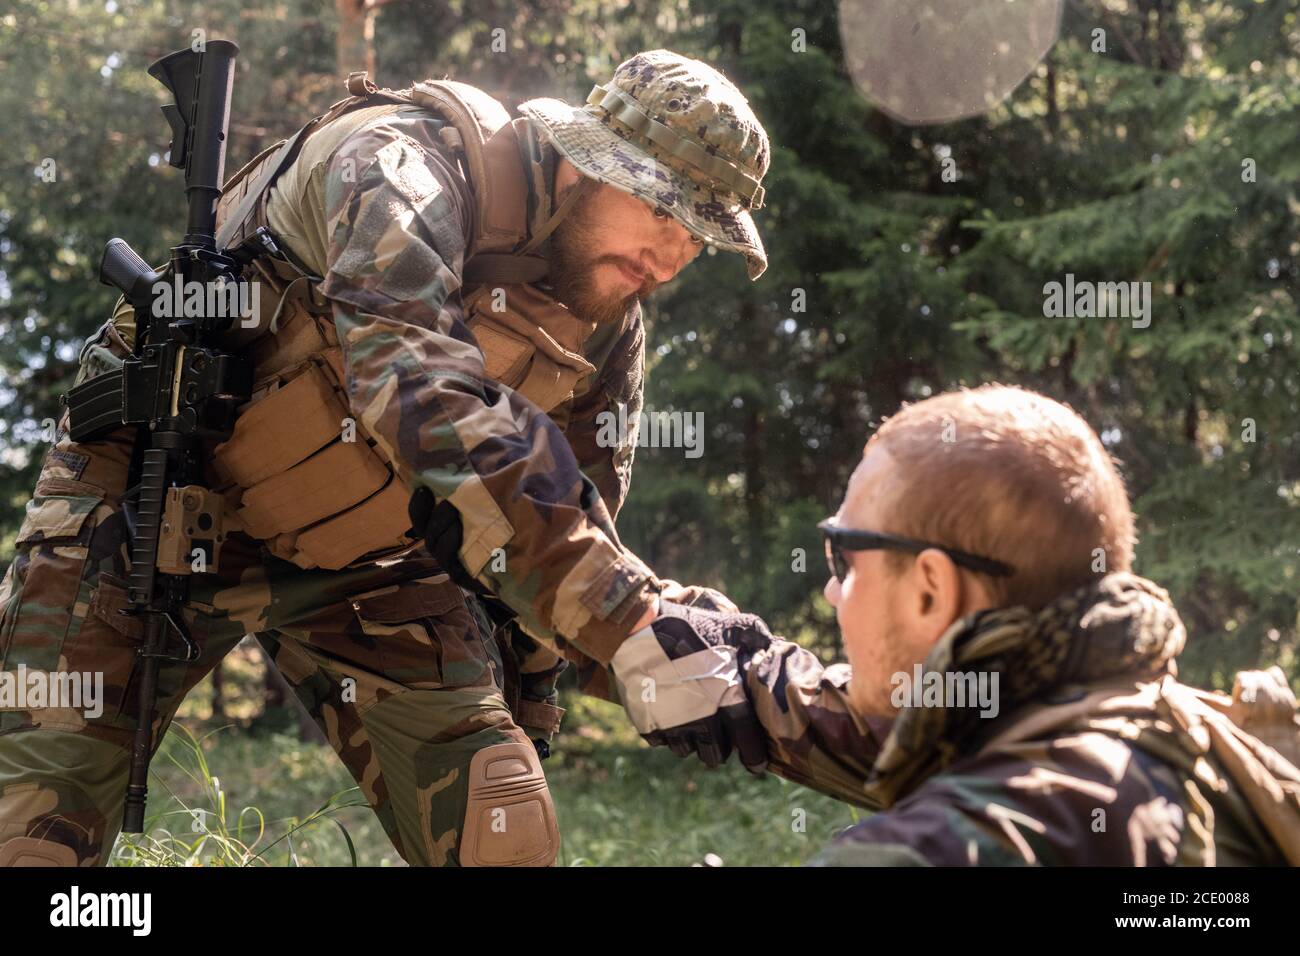 Bearded soldier in hat and vest giving hand to wounded military friend while picking him up off ground in forest Stock Photo